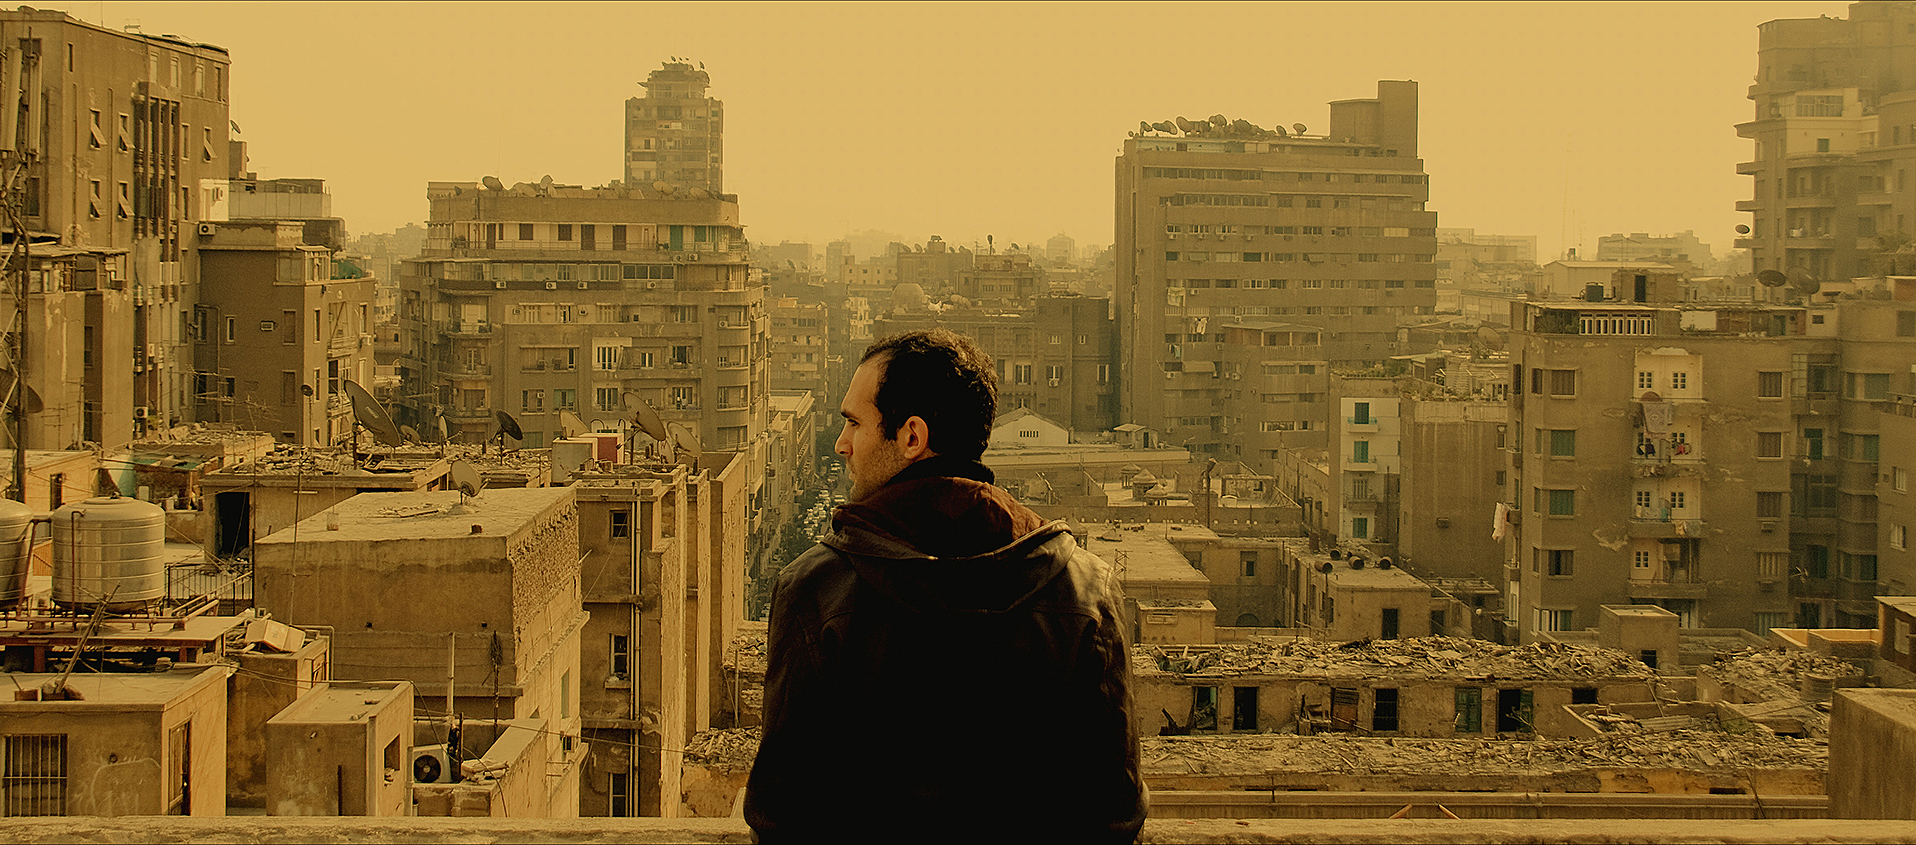 Still from Tamer El Said's film In the Last Days of the City